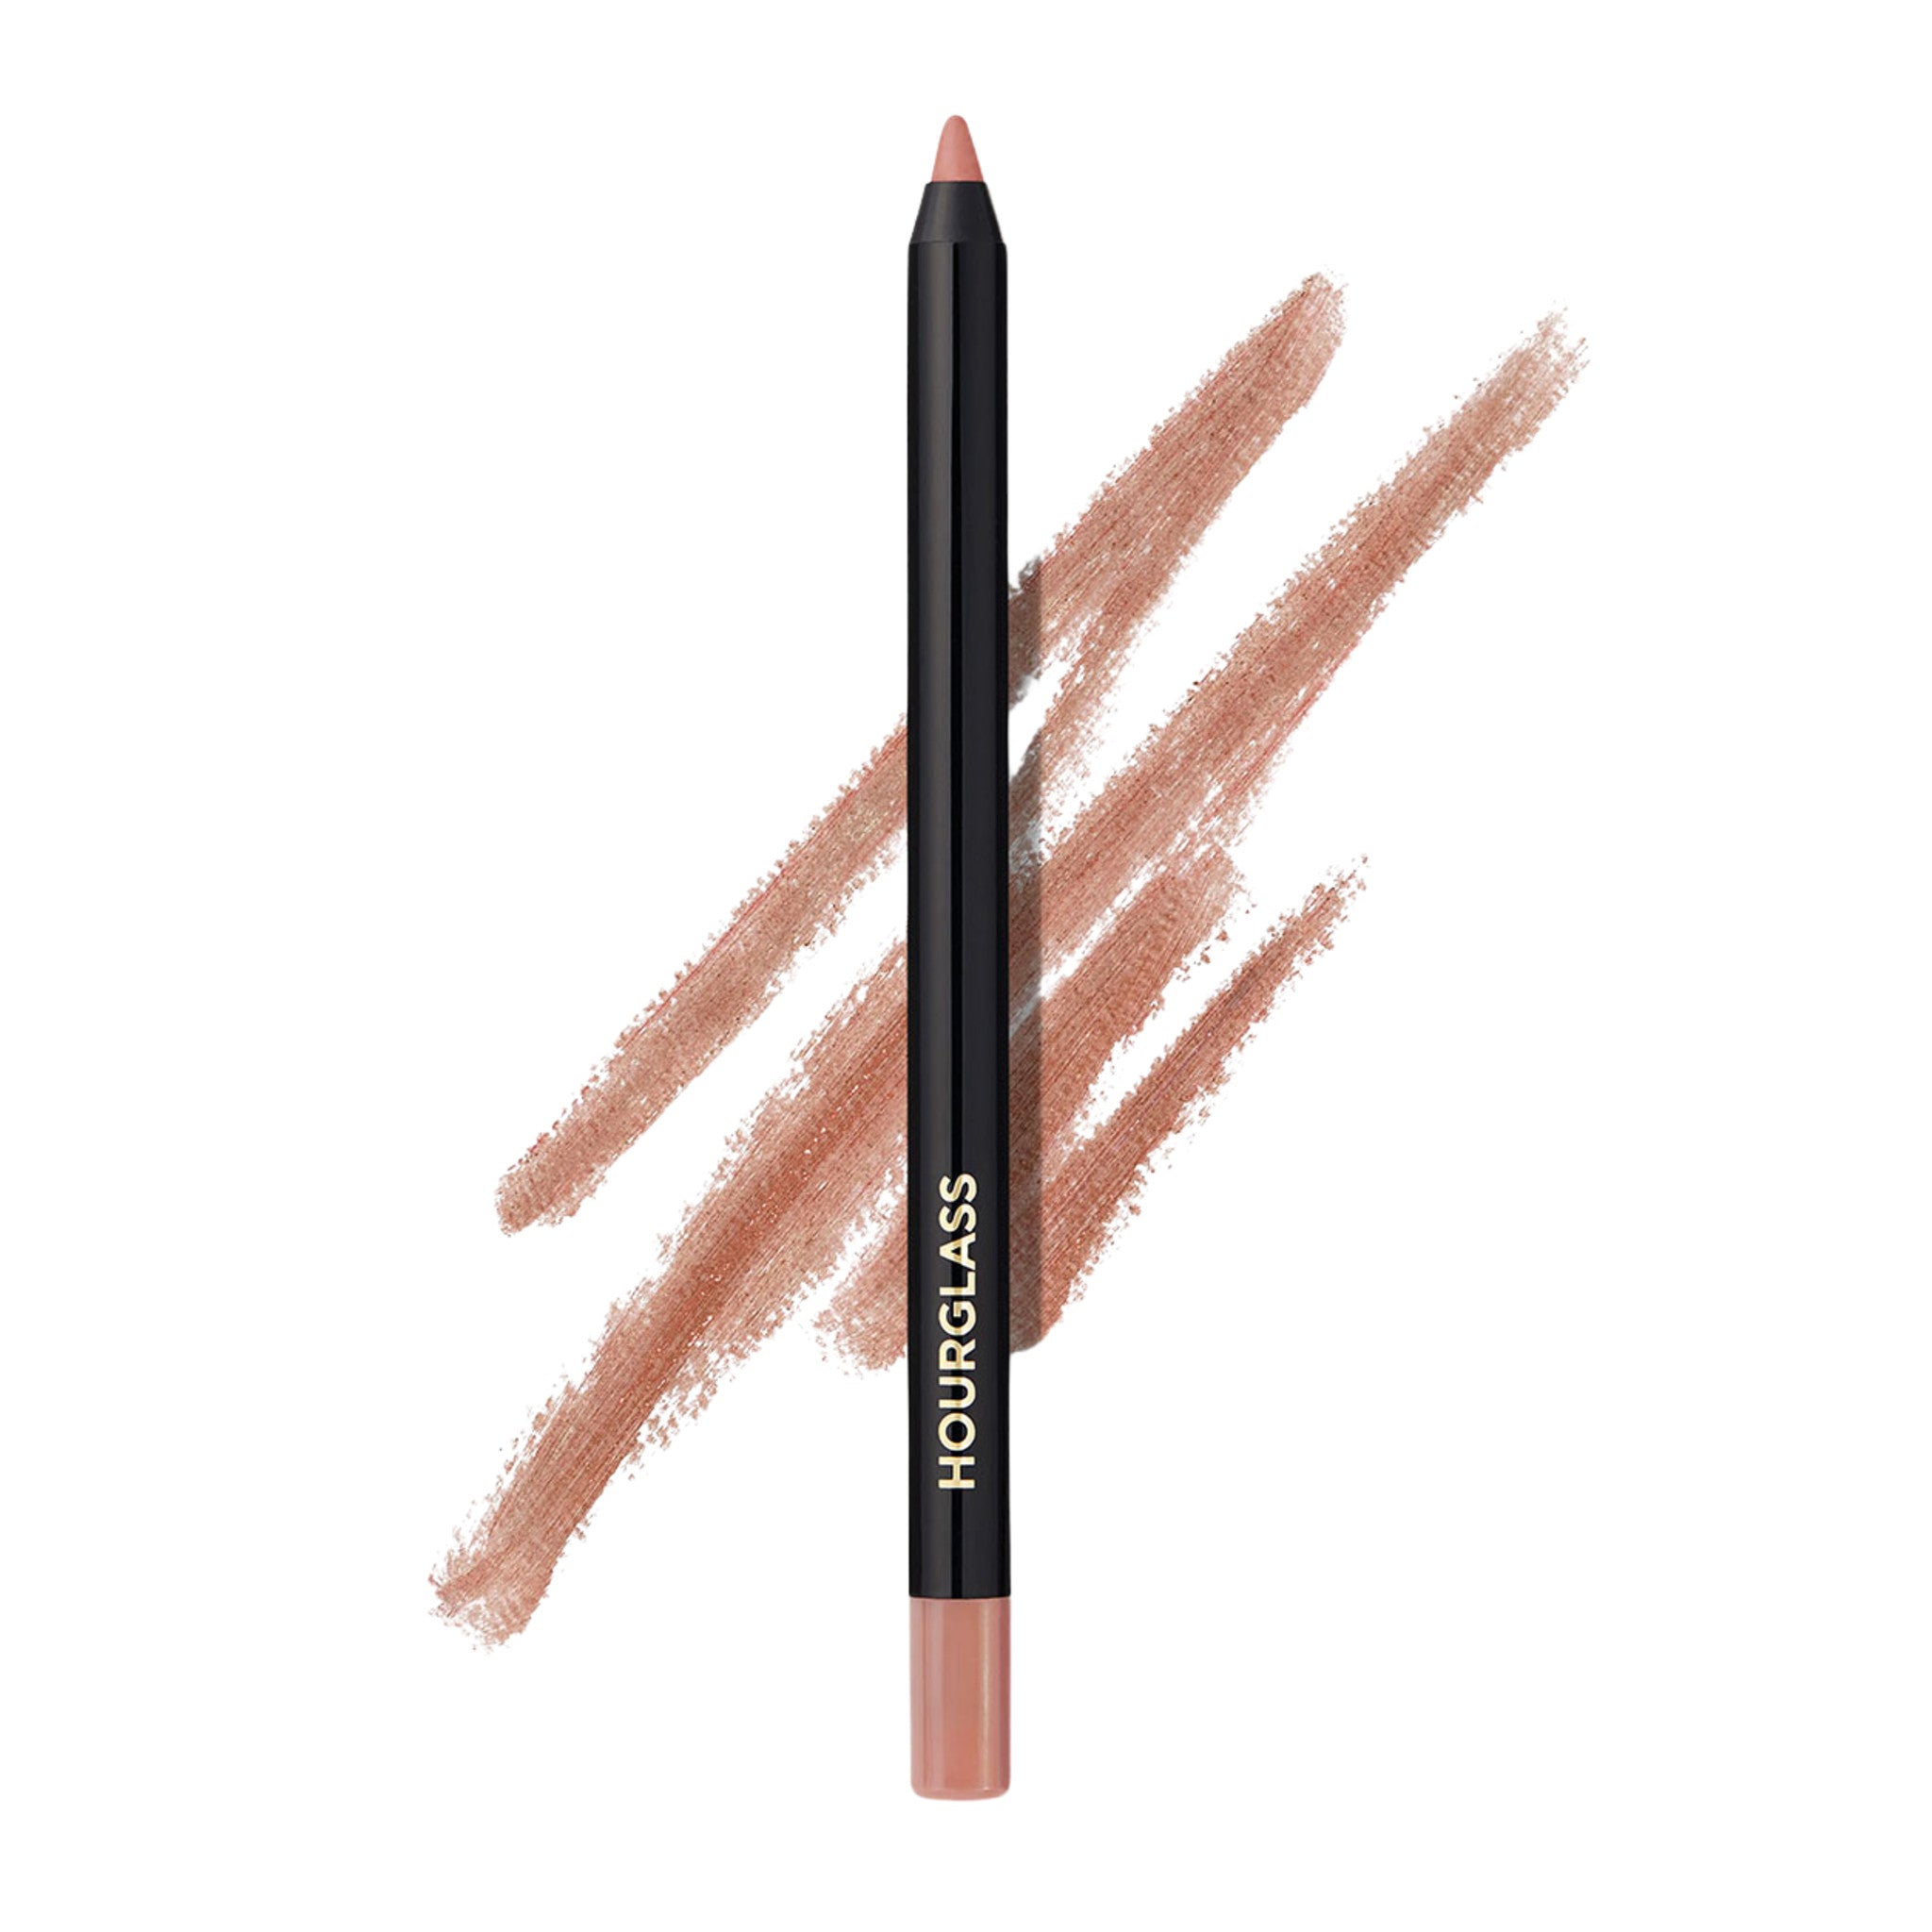 Hourglass Shape and Sculpt Lip Liner Color/Shade variant: Expose 1 main image. This product is in the color nude